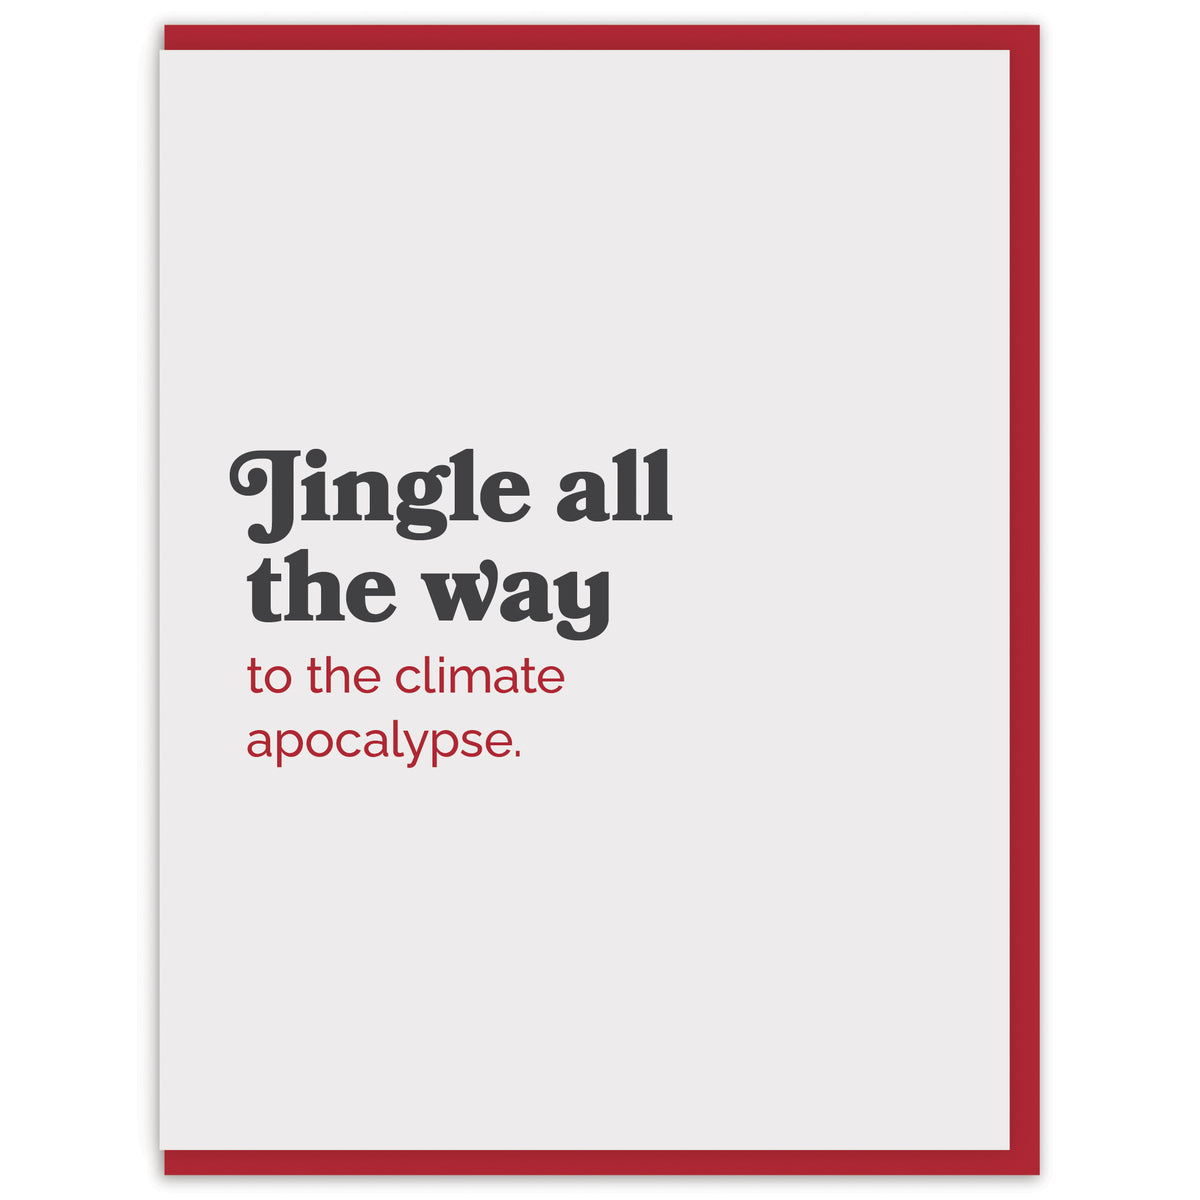 Jingle all the way to the climate apocalypse.